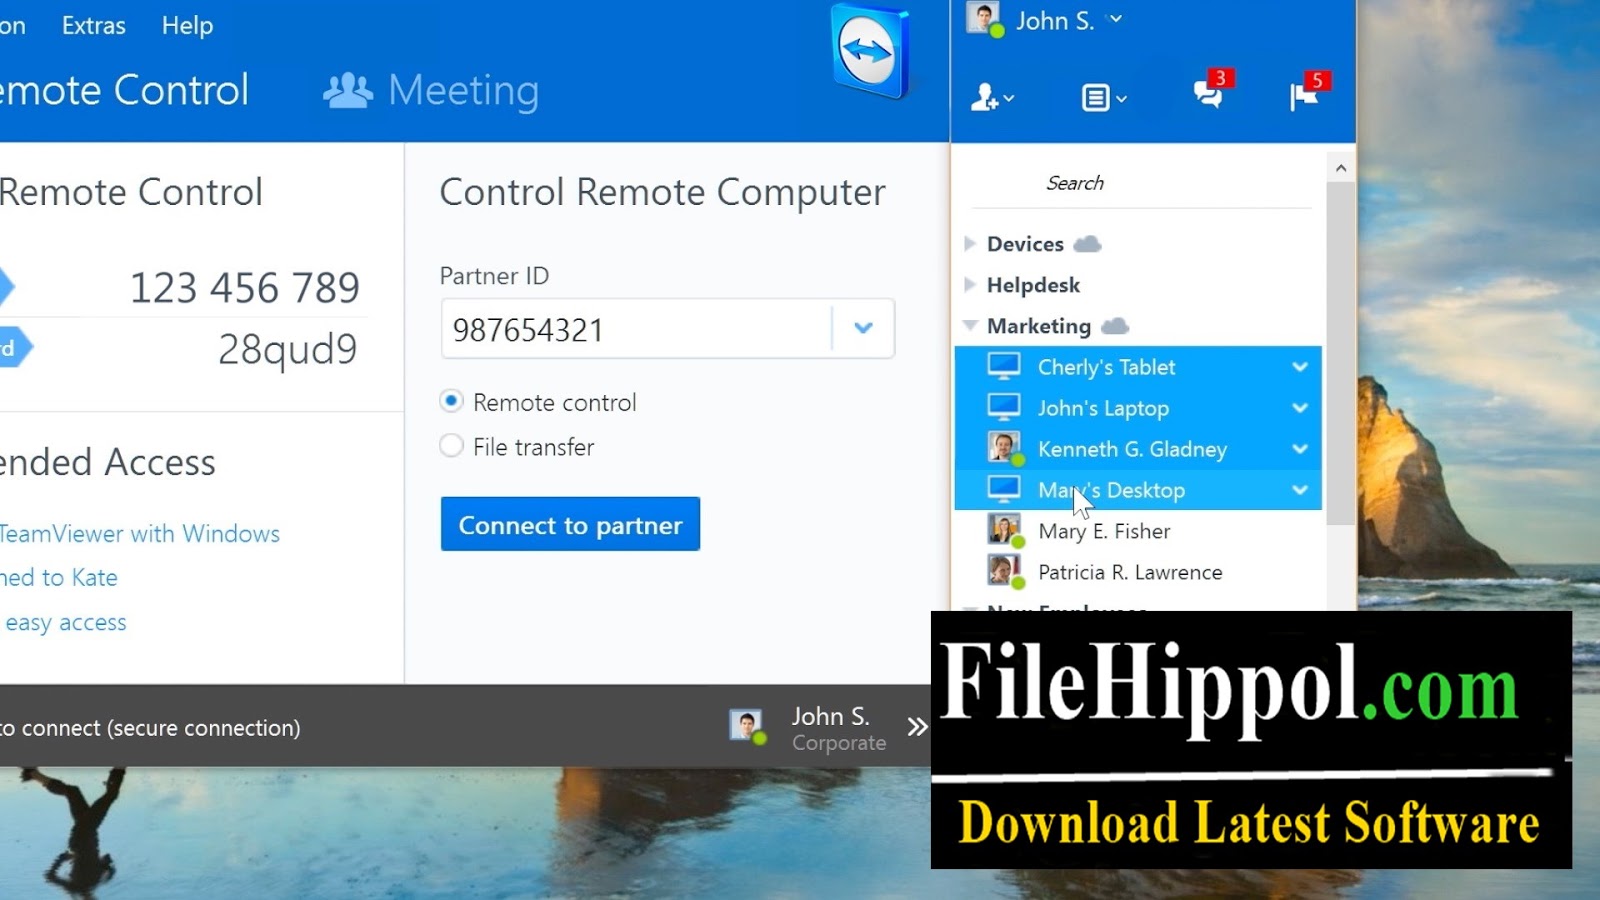 Teamviewer 11 Free Download Latest Version Windows And Mac